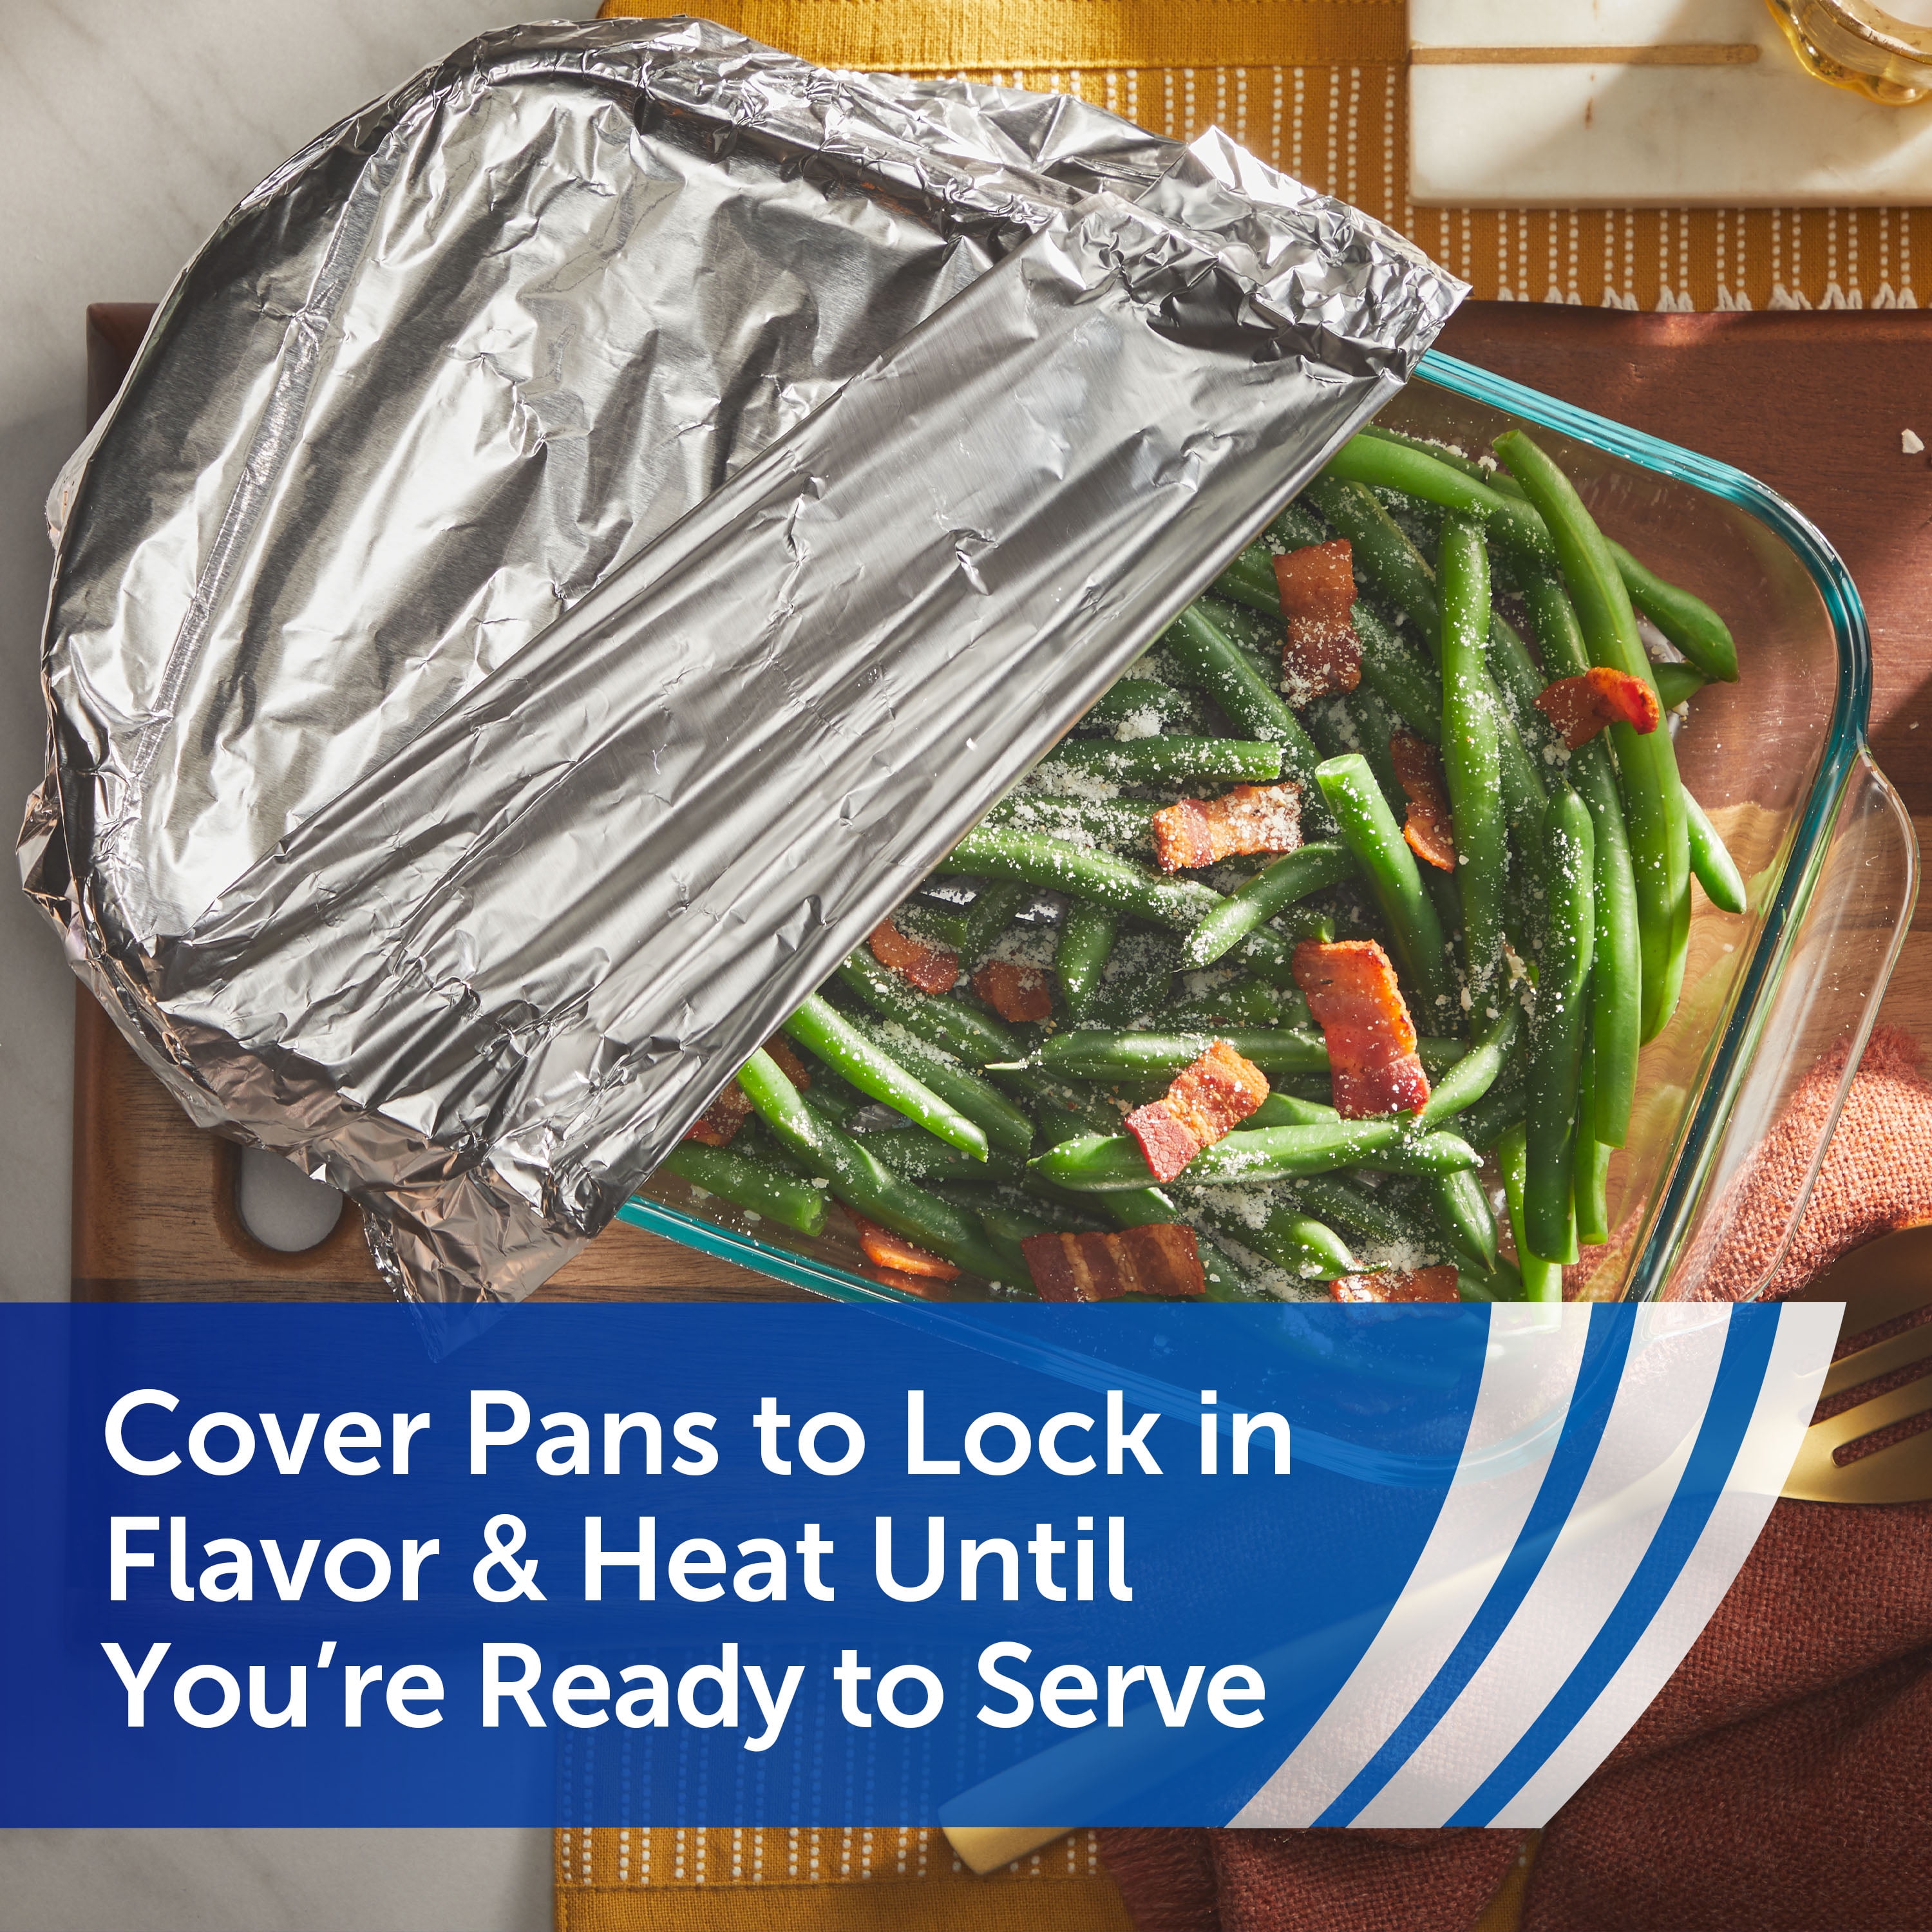  If You Care Aluminum Foil– Pack of One 50 Sq. Ft. Roll - 100%  Recycled Tin Foil Kitchen Wrap,Silver : Arts, Crafts & Sewing